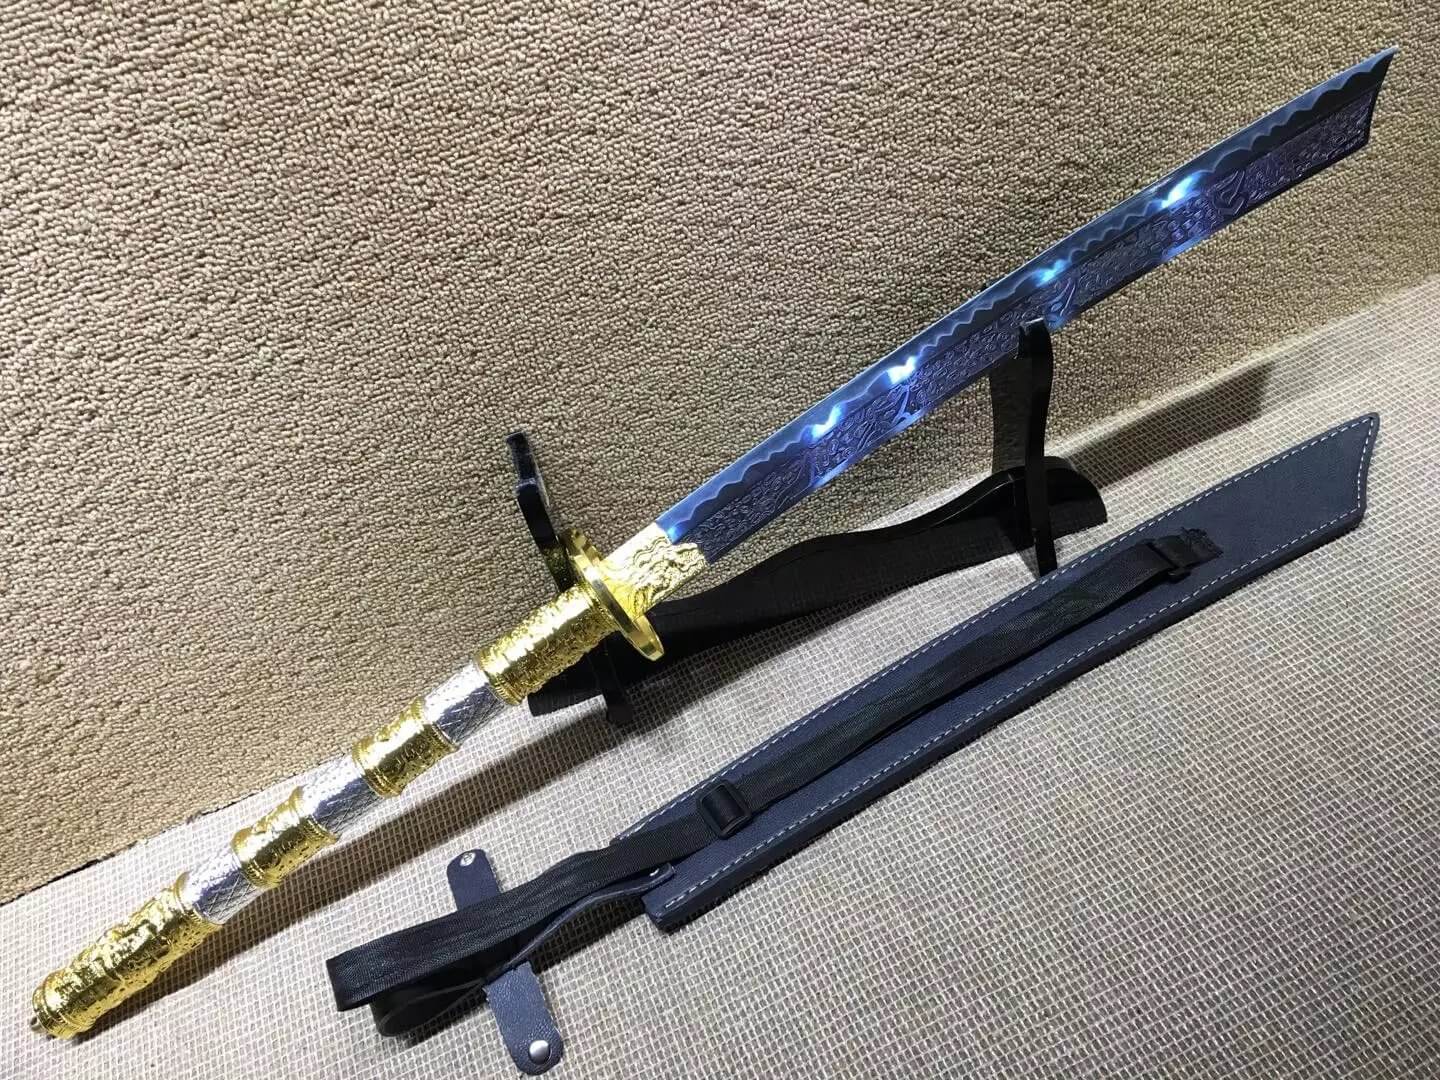 Kangxi baodao,High carbon steel blue blade,Alloy fitting - Chinese sword shop